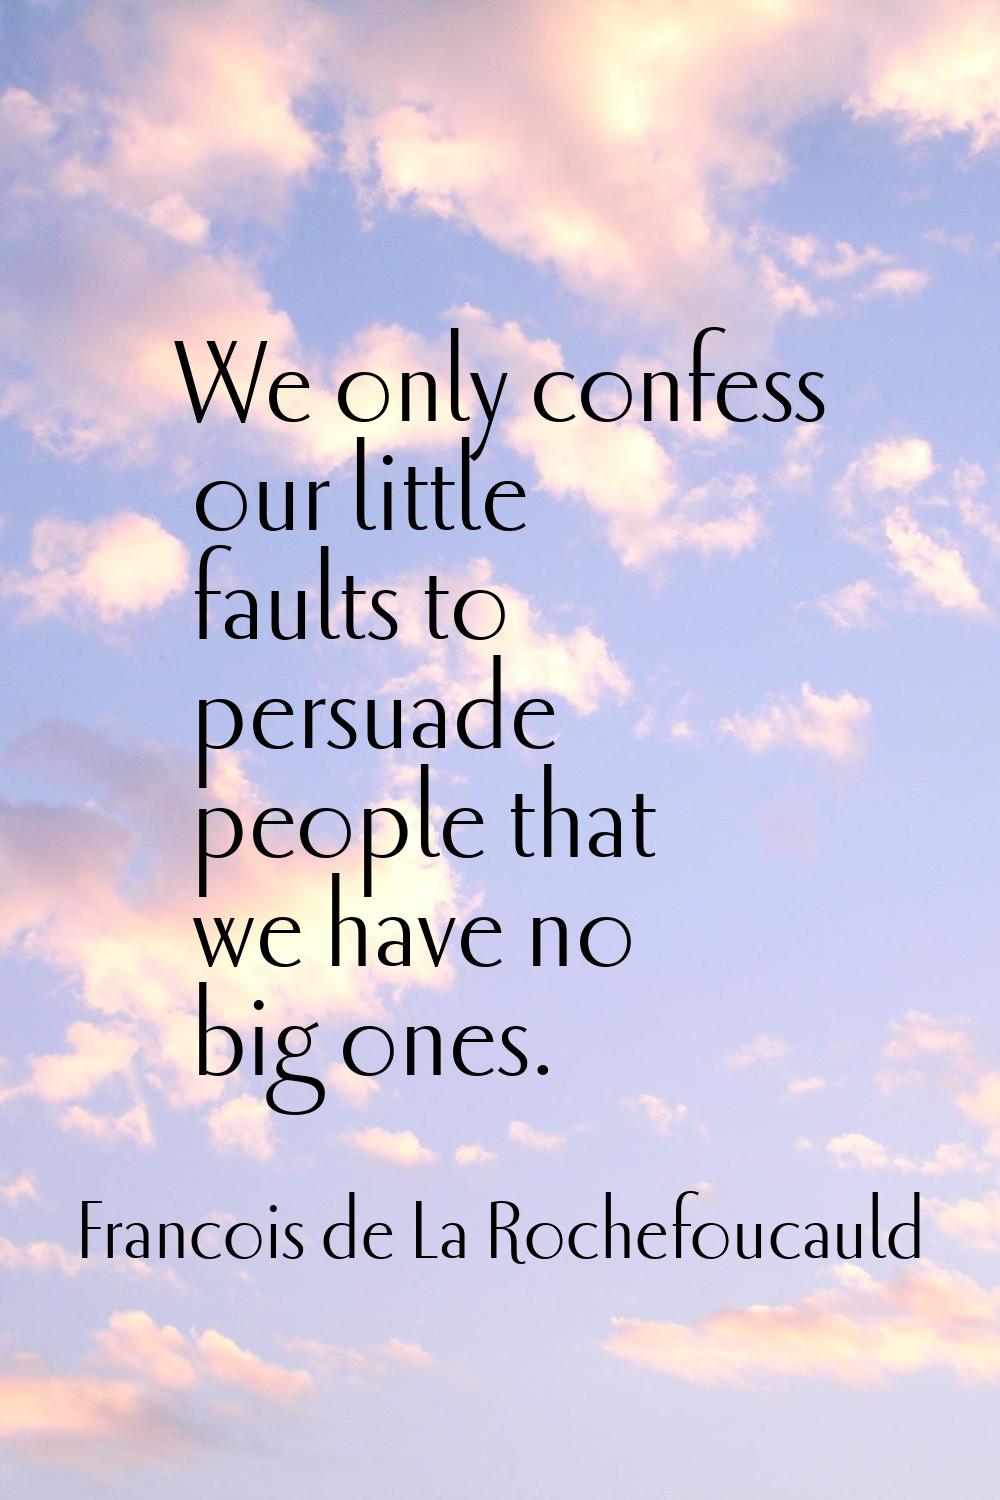 We only confess our little faults to persuade people that we have no big ones.